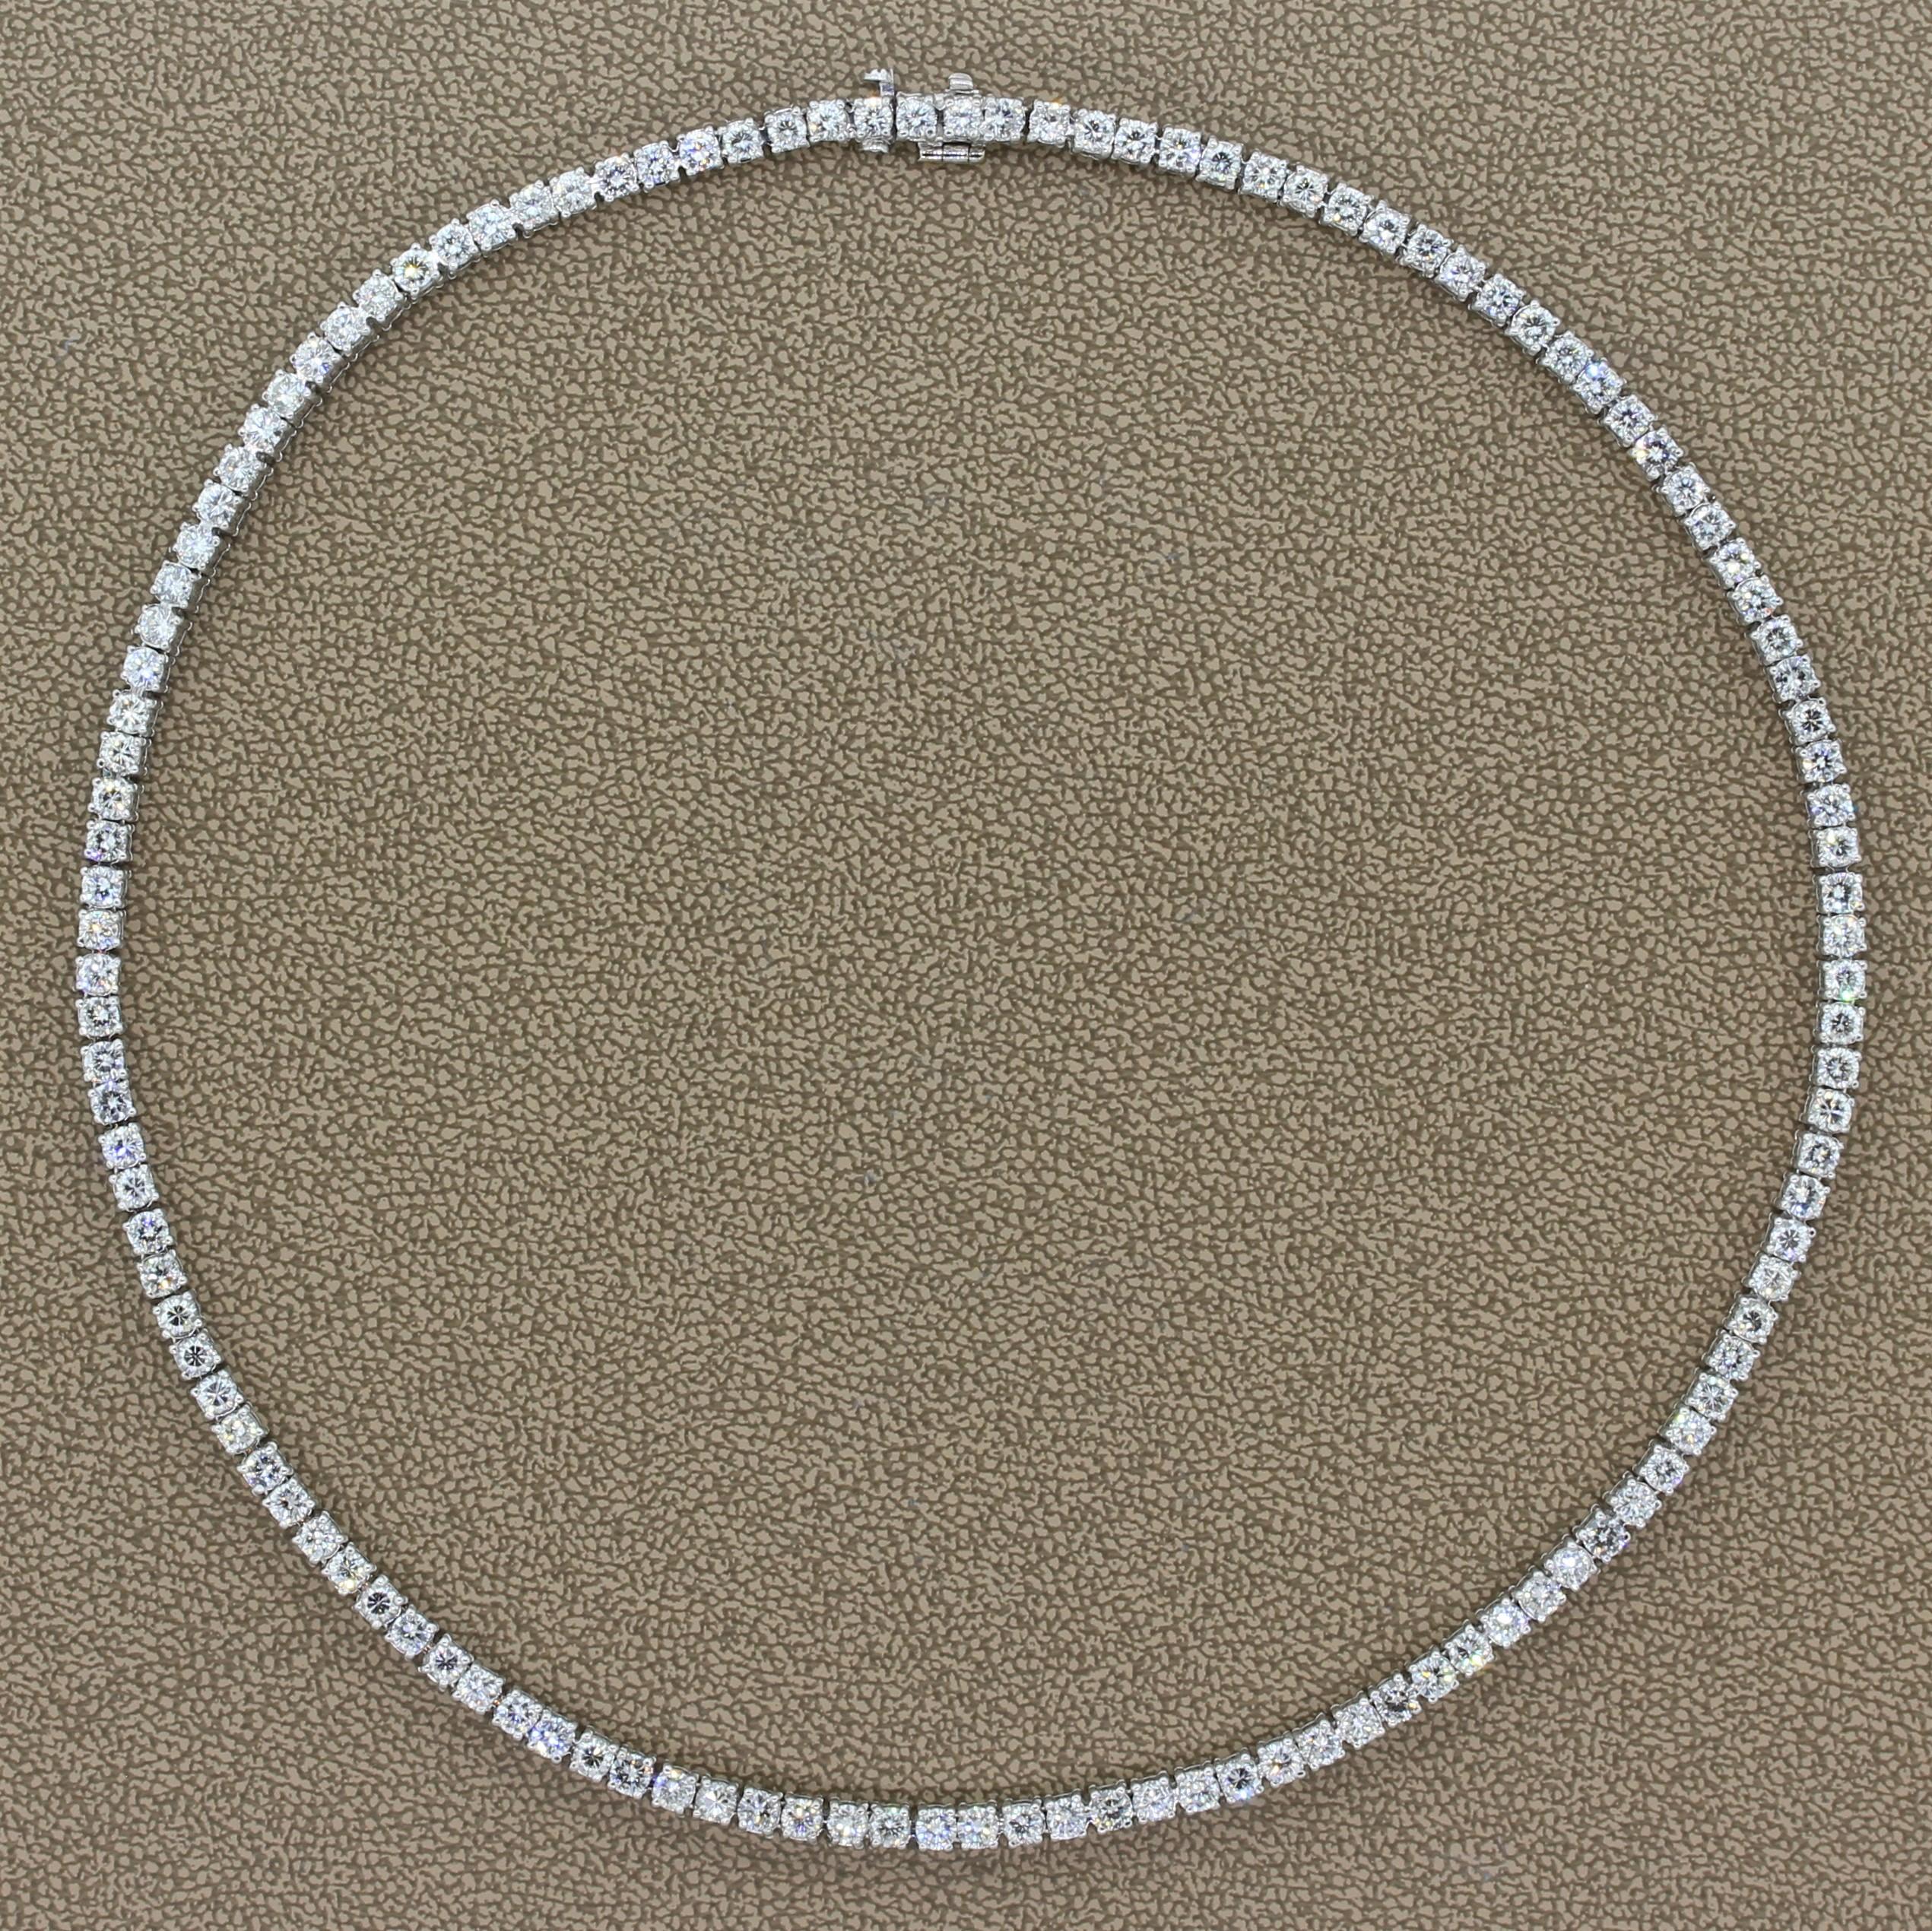 A classic tennis necklace featuring 12.90 carats of diamonds. The colorless round cut diamonds are prong set in luxurious platinum. A seamless closure is provided by a hidden safety latch for safe keeping. 

Necklace Length: 15.00 inches 
Necklace